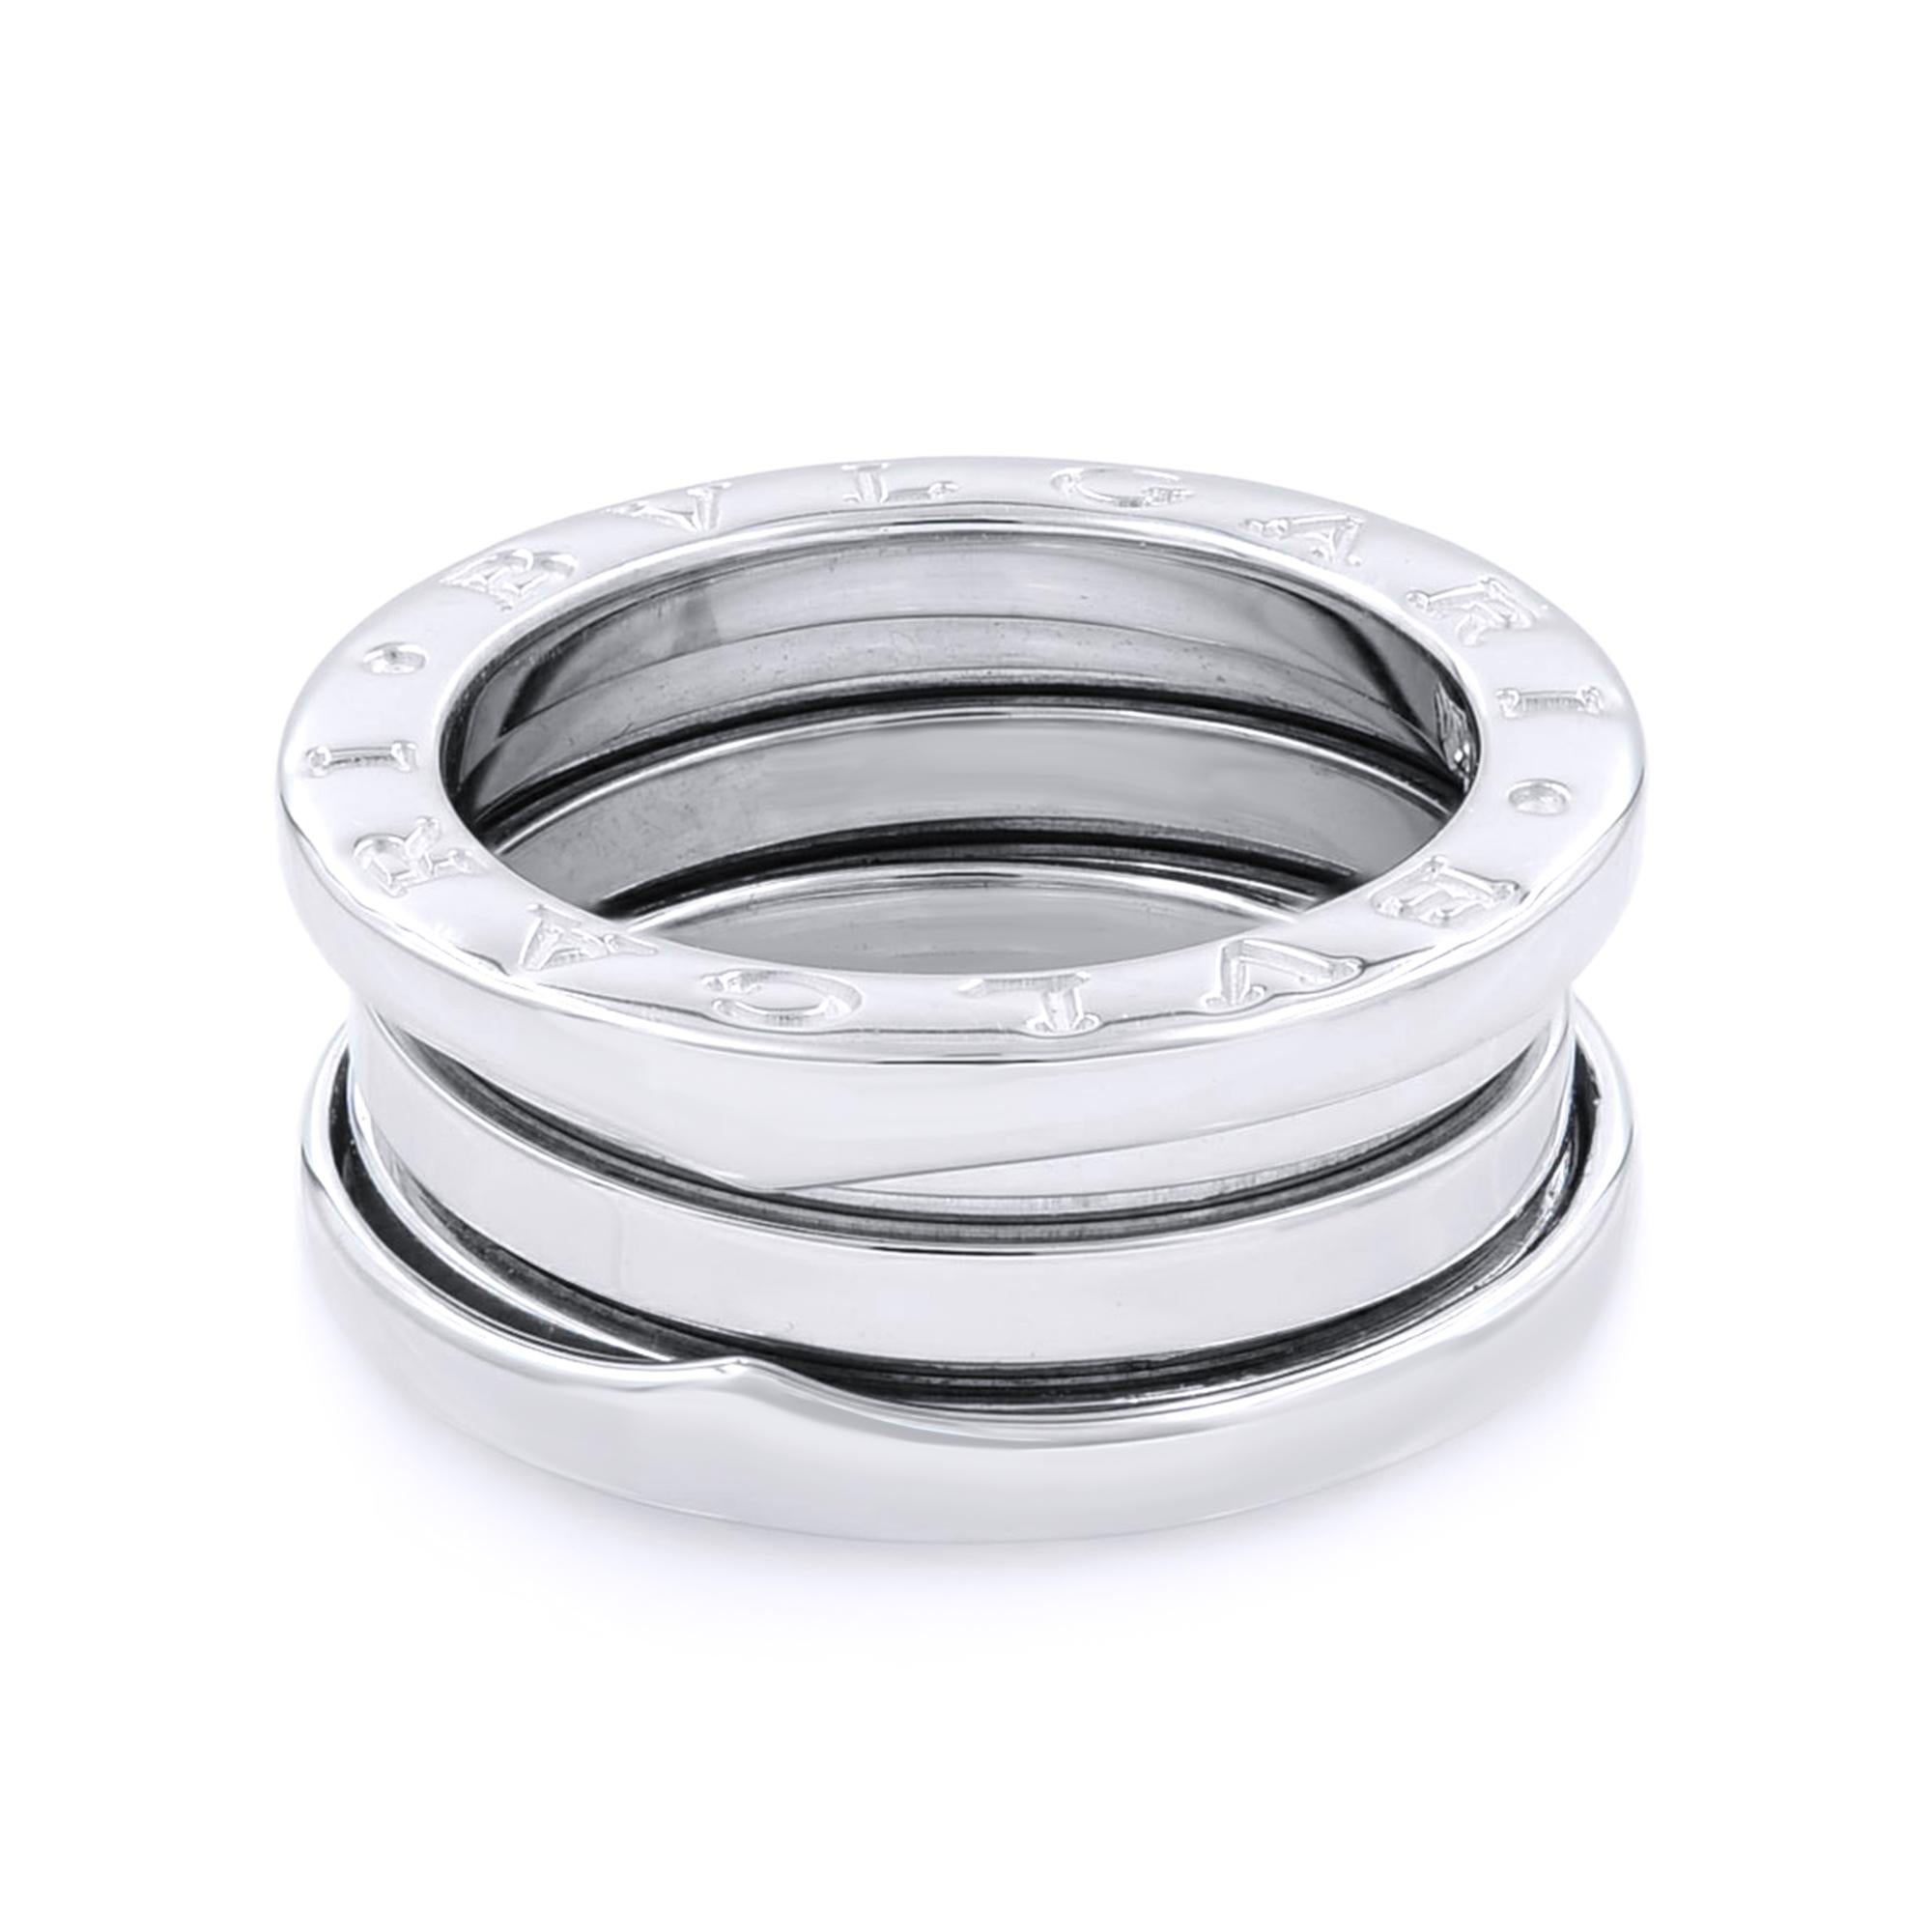 Bvlgari B.Zero 1 18K White Gold Ring SZ5.25

The B.Zero ring is a signature piece from the legendary jewelry design house Bvlgari. It features a clean, modern design with a white gold central band surrounded by two white gold rims with the BVLGARI